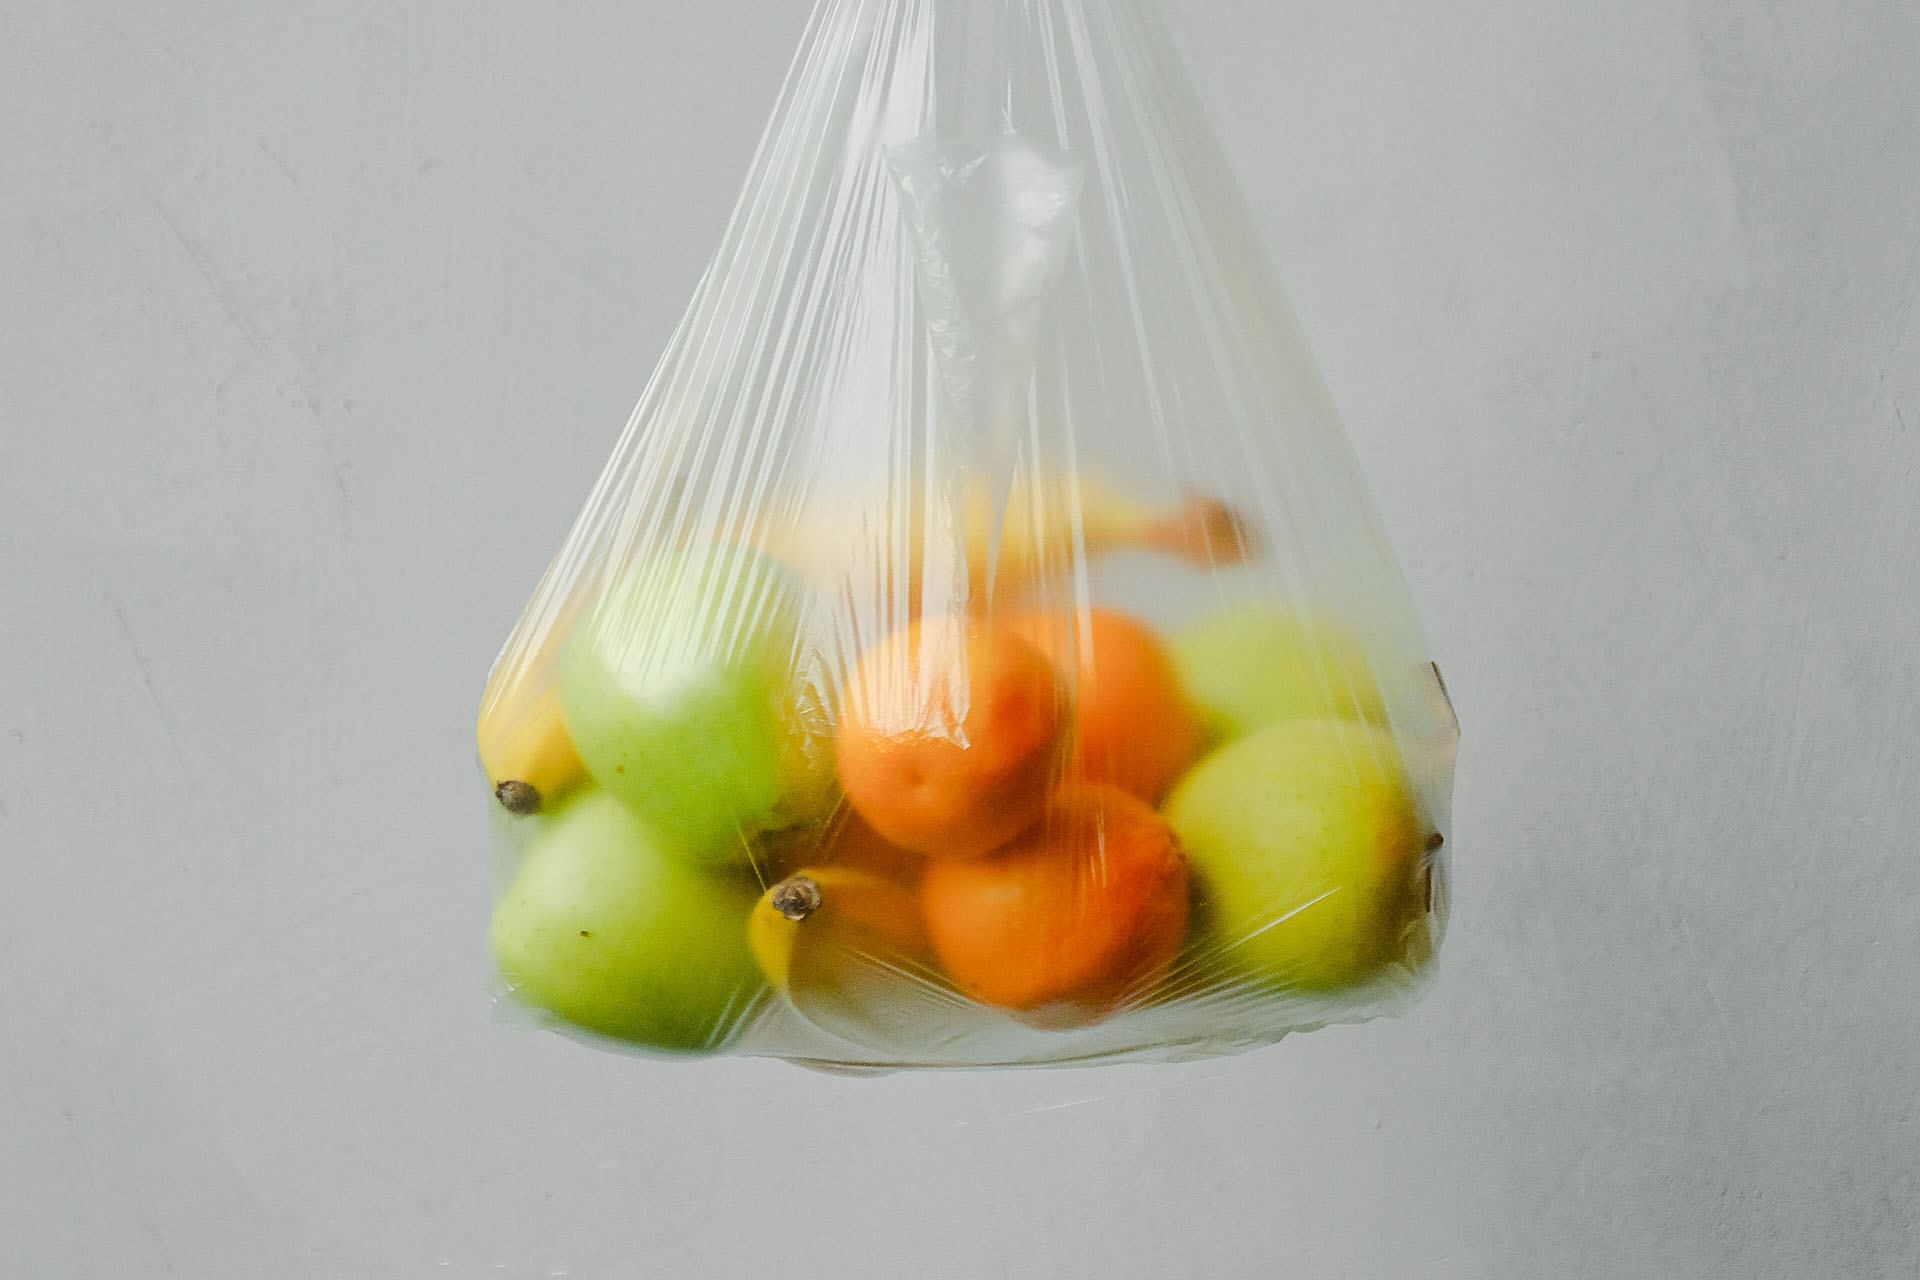 A transparent plastic bag that hangs in the air. It contains tangerines, green apples and yellow bananas.